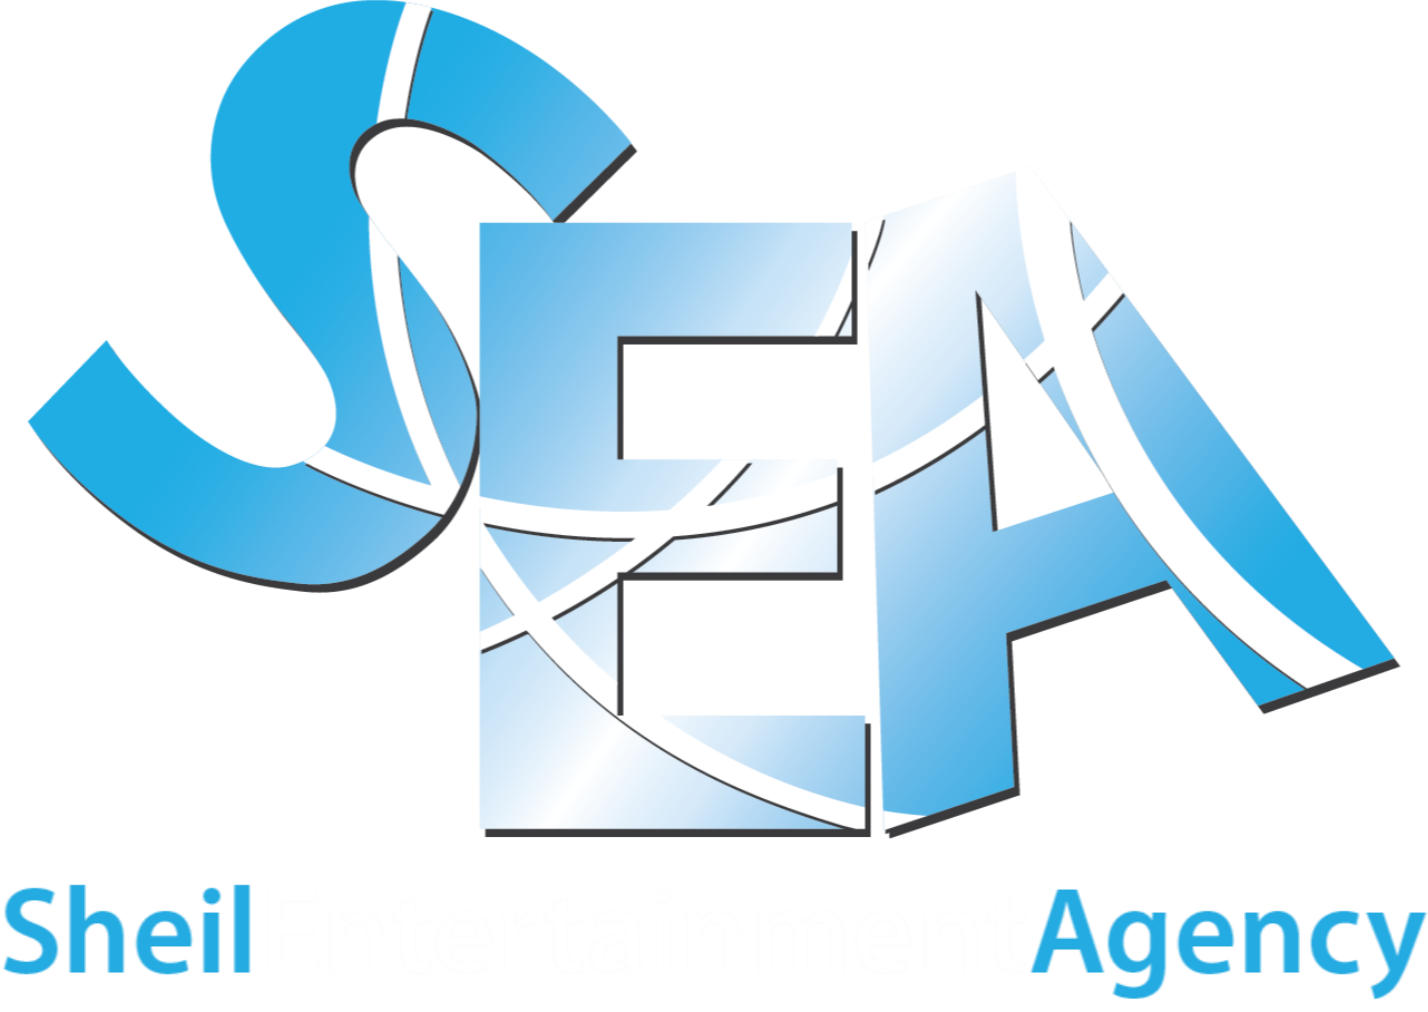 Sheil Entertainment Agency - Unrivaled creative and entertainment solutions